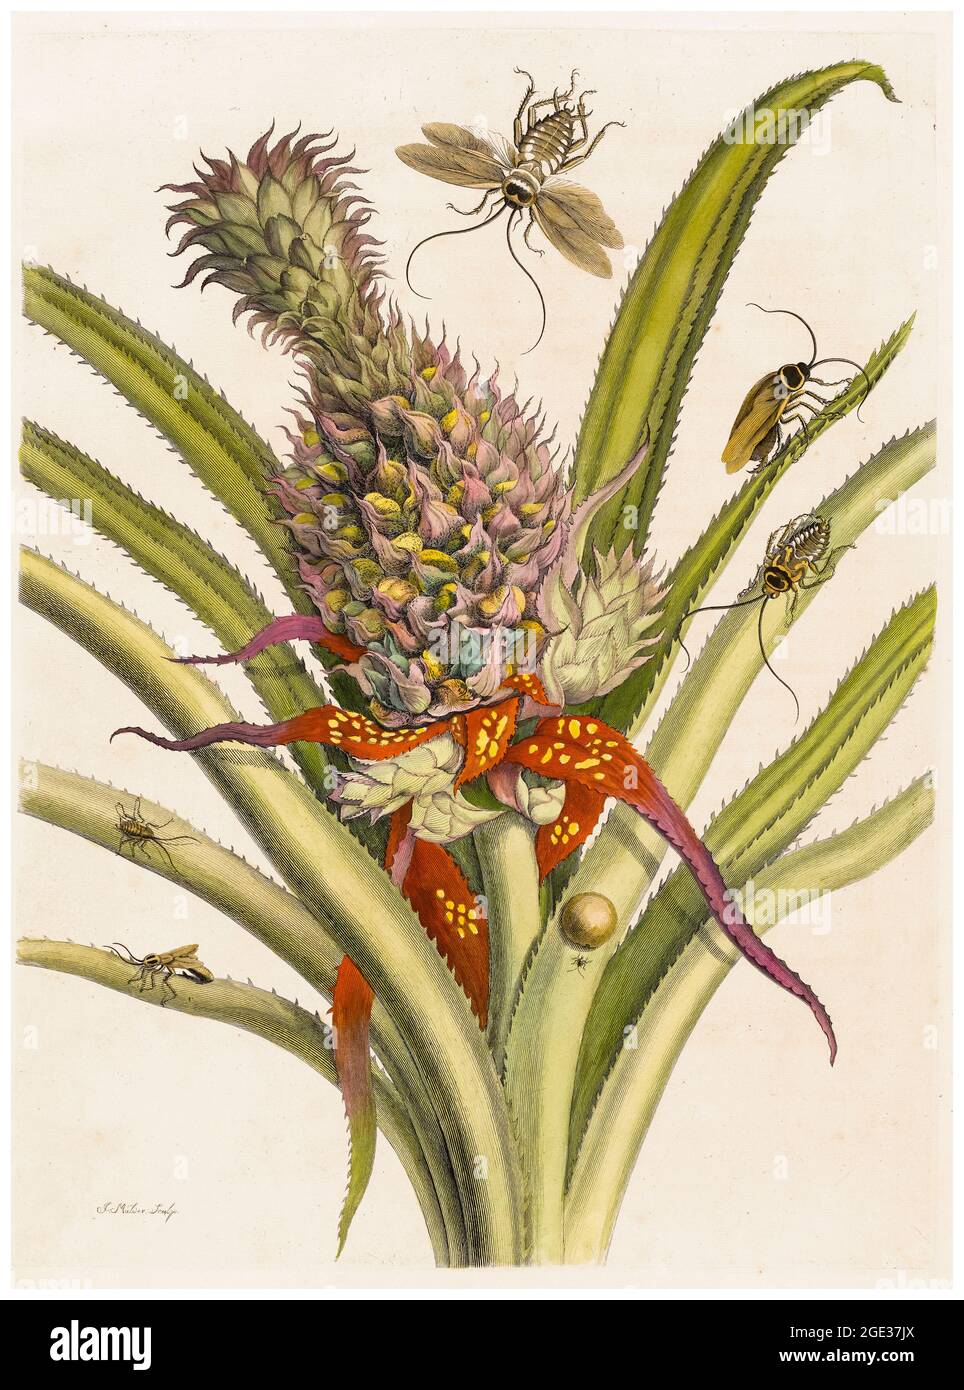 Maria Sibylla Merian, 18th Century illustration, Pineapple with South American cockroaches, 1719 Stock Photo